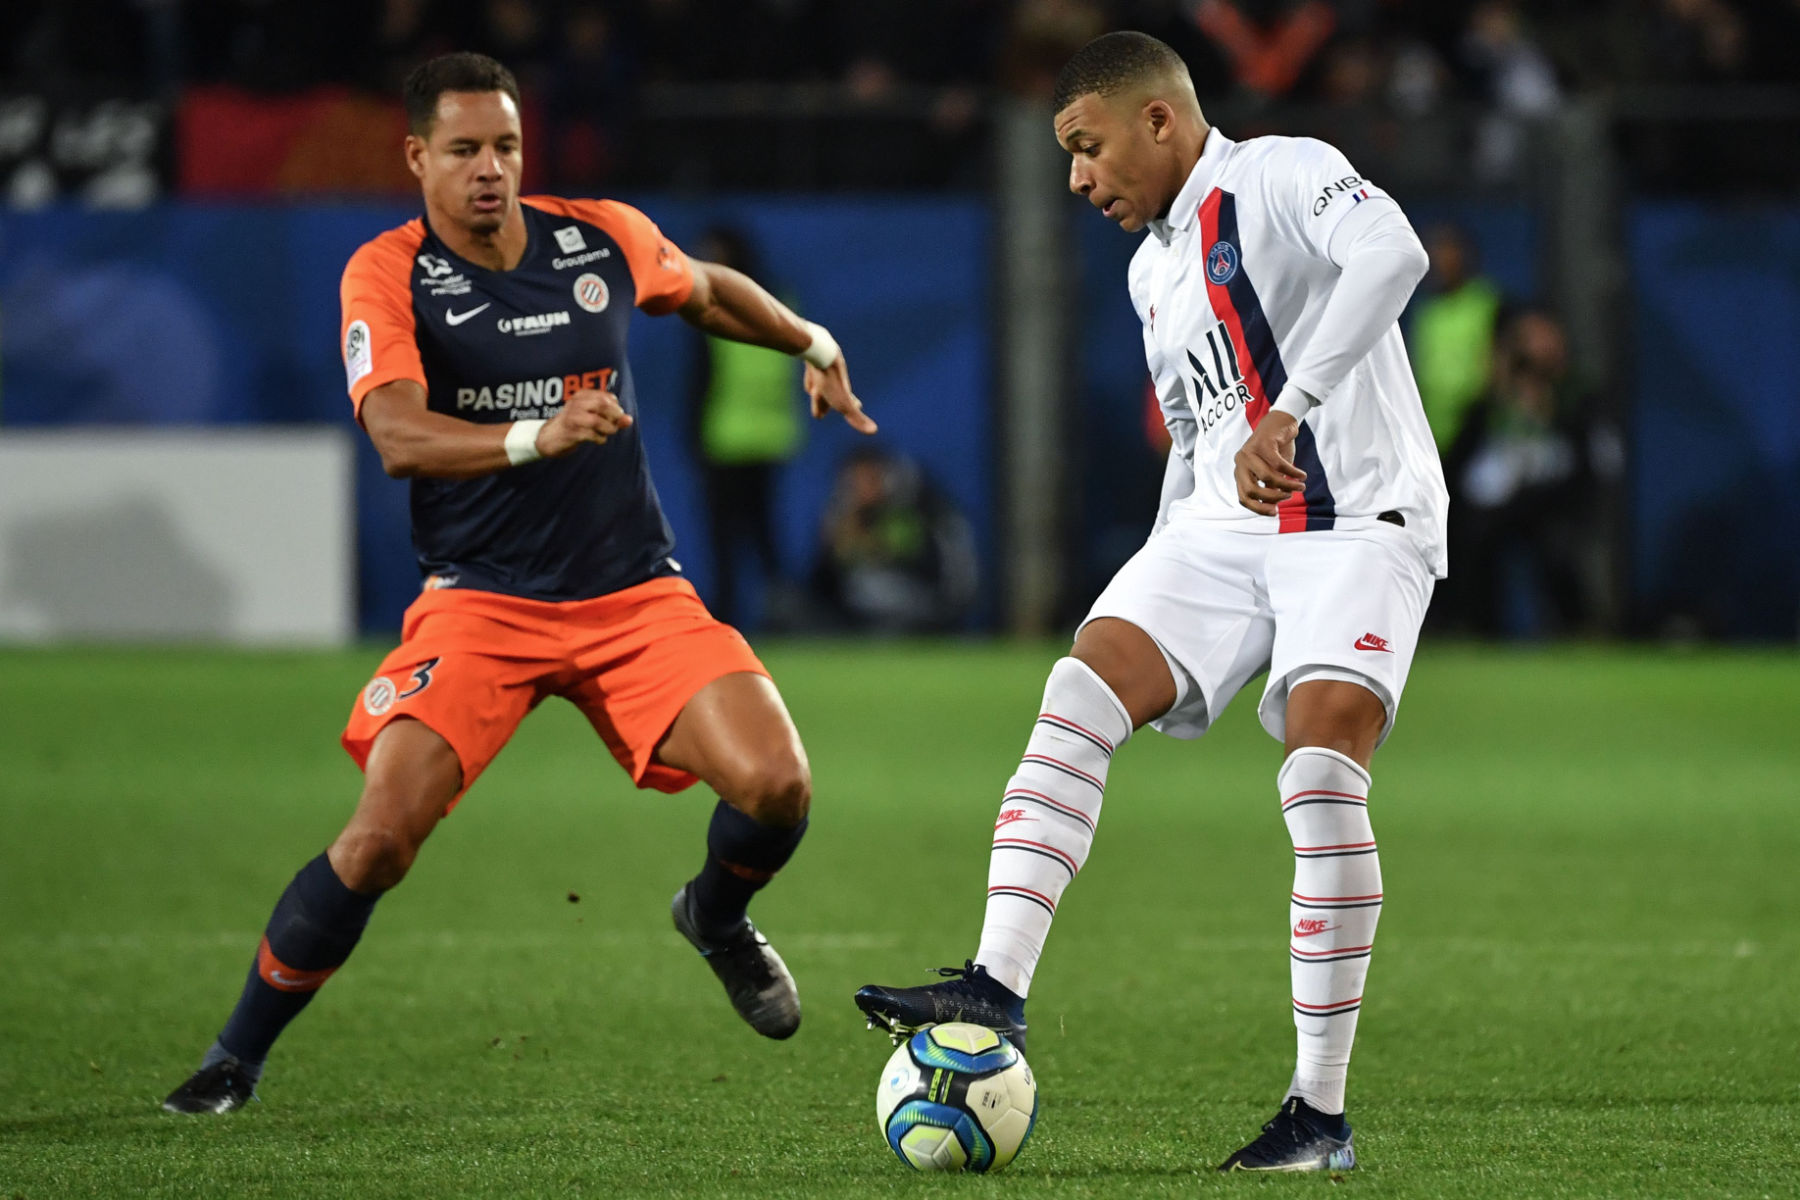 Video: Frustrated Mbappé Ignores Tuchel After Being Subbed Off - PSG Talk